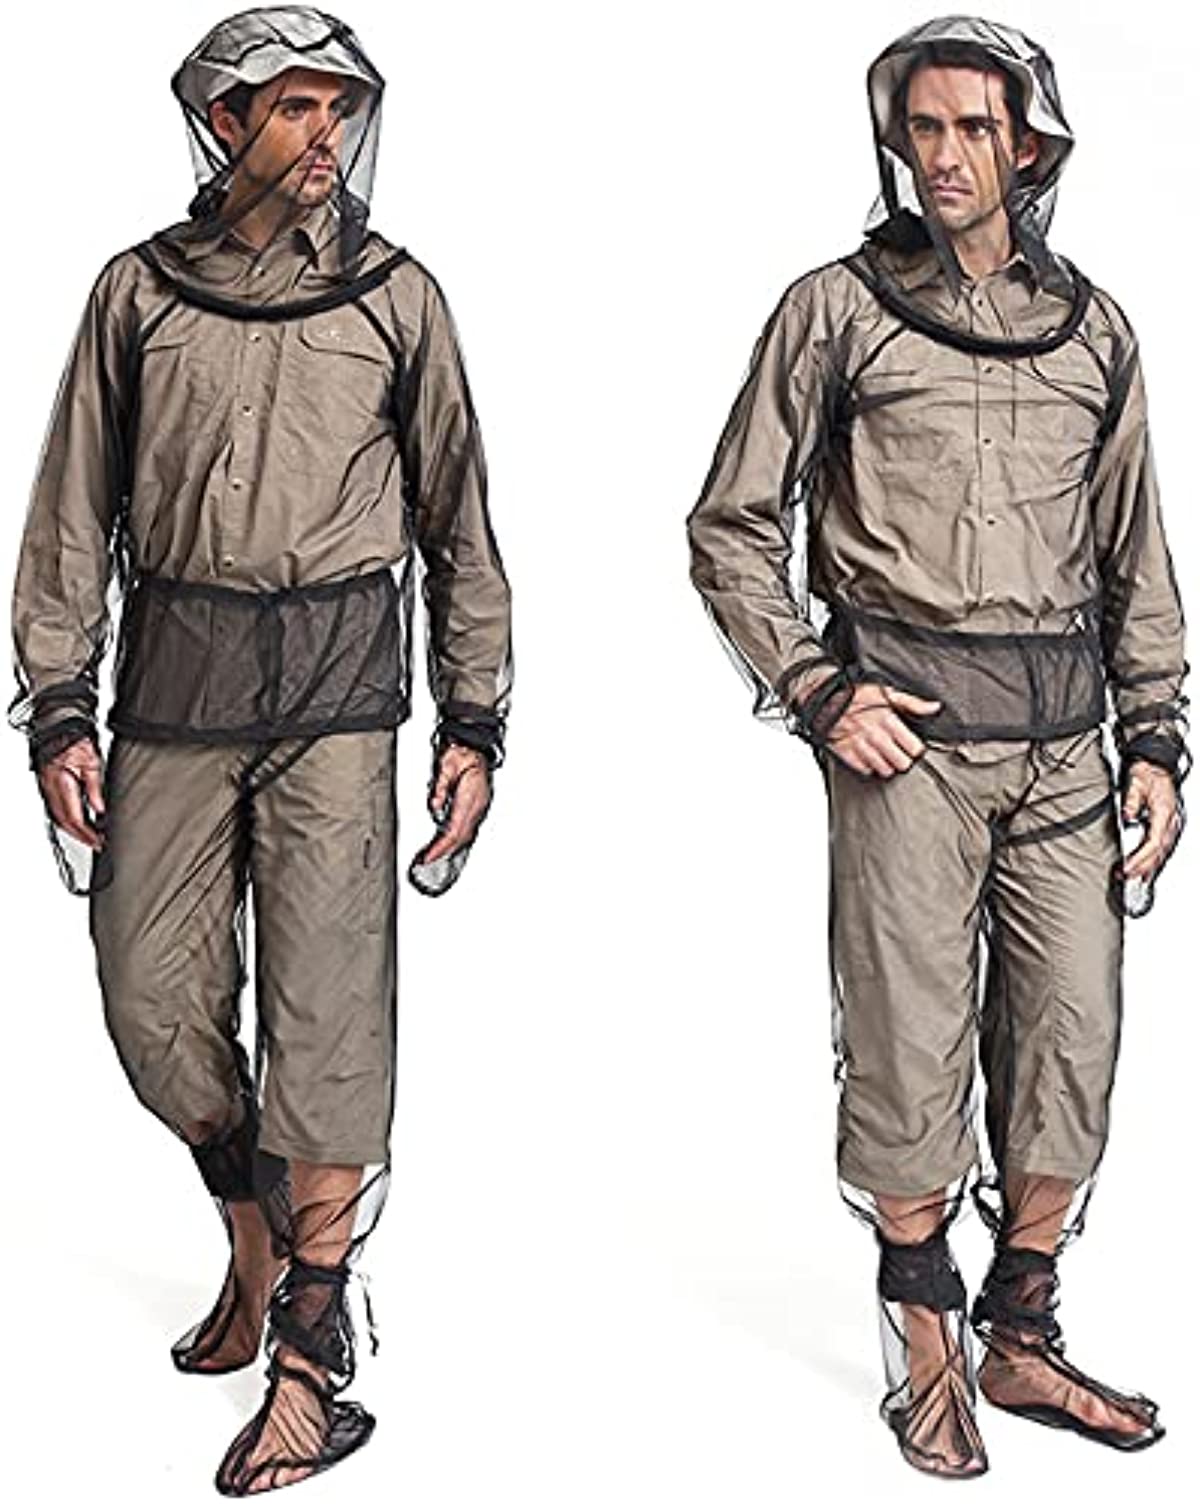 Sofiey 4 Pieces Mosquito Net Suit– Jacket Hood& Pants& Mitts& Socks Sets, Light-Weight& Breathable Mesh Clothing for Men& Women, Ideal for Fishing, Hiking, Camping, Farming and Gardening (S/M)